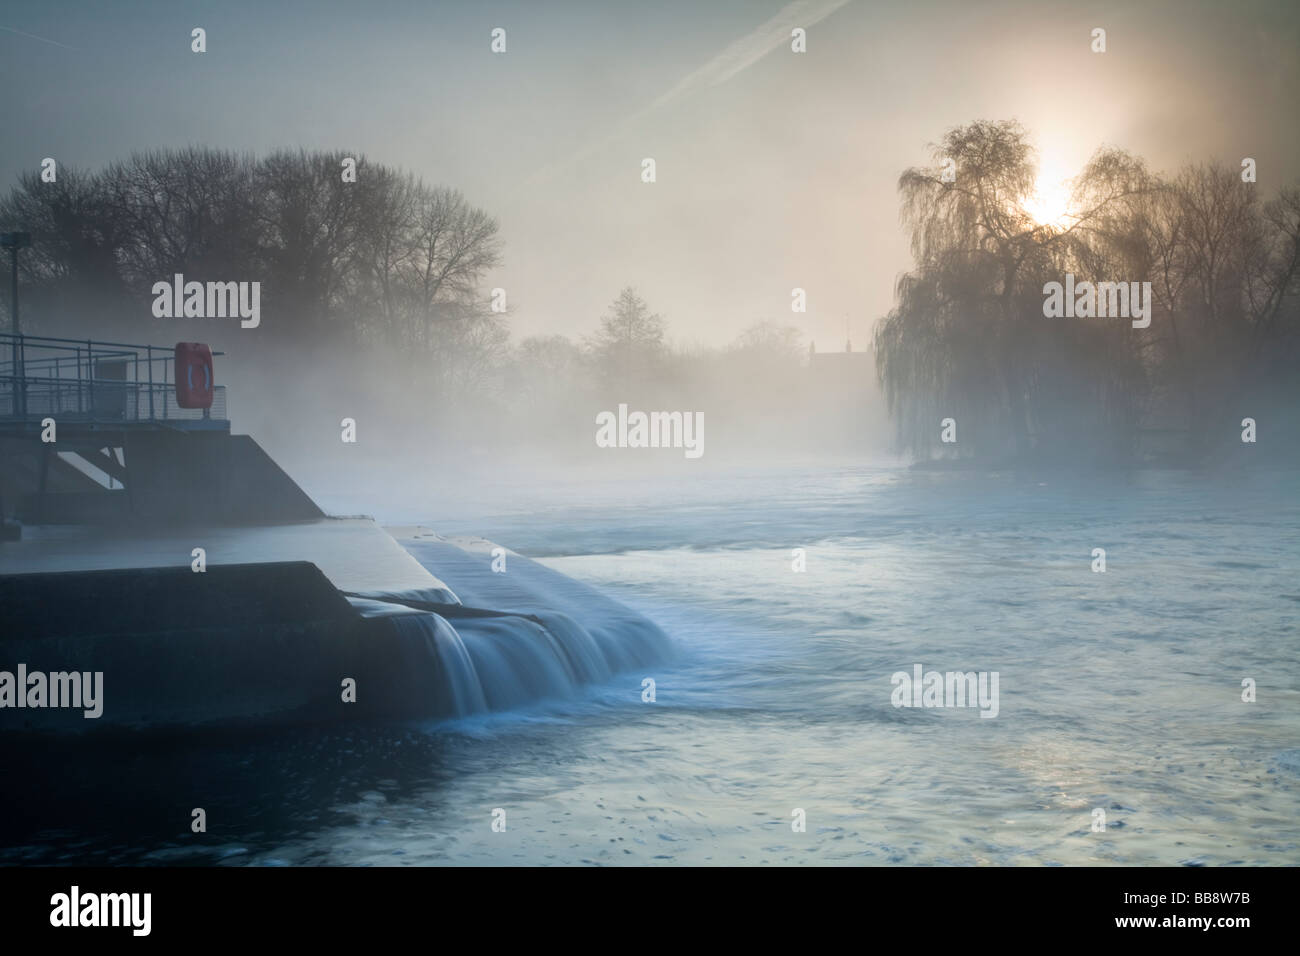 Pangbourne weir on the River Thames on a misty dawn Berkshire Uk Stock Photo